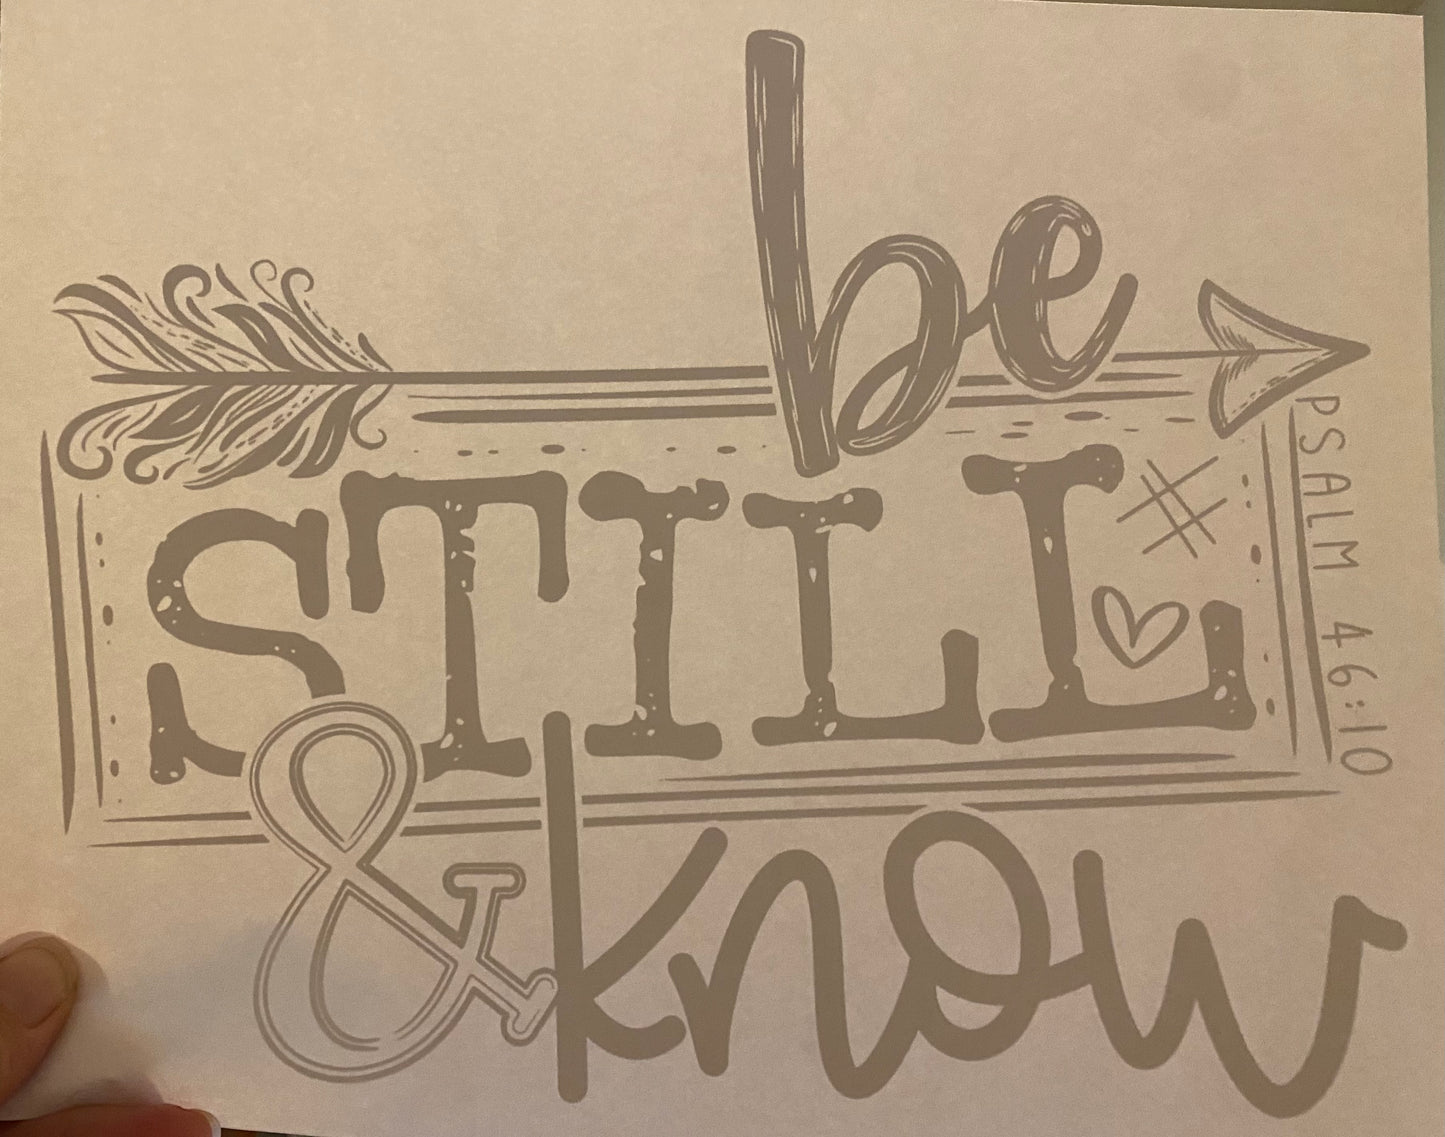 Be still and know/Ps 46:10